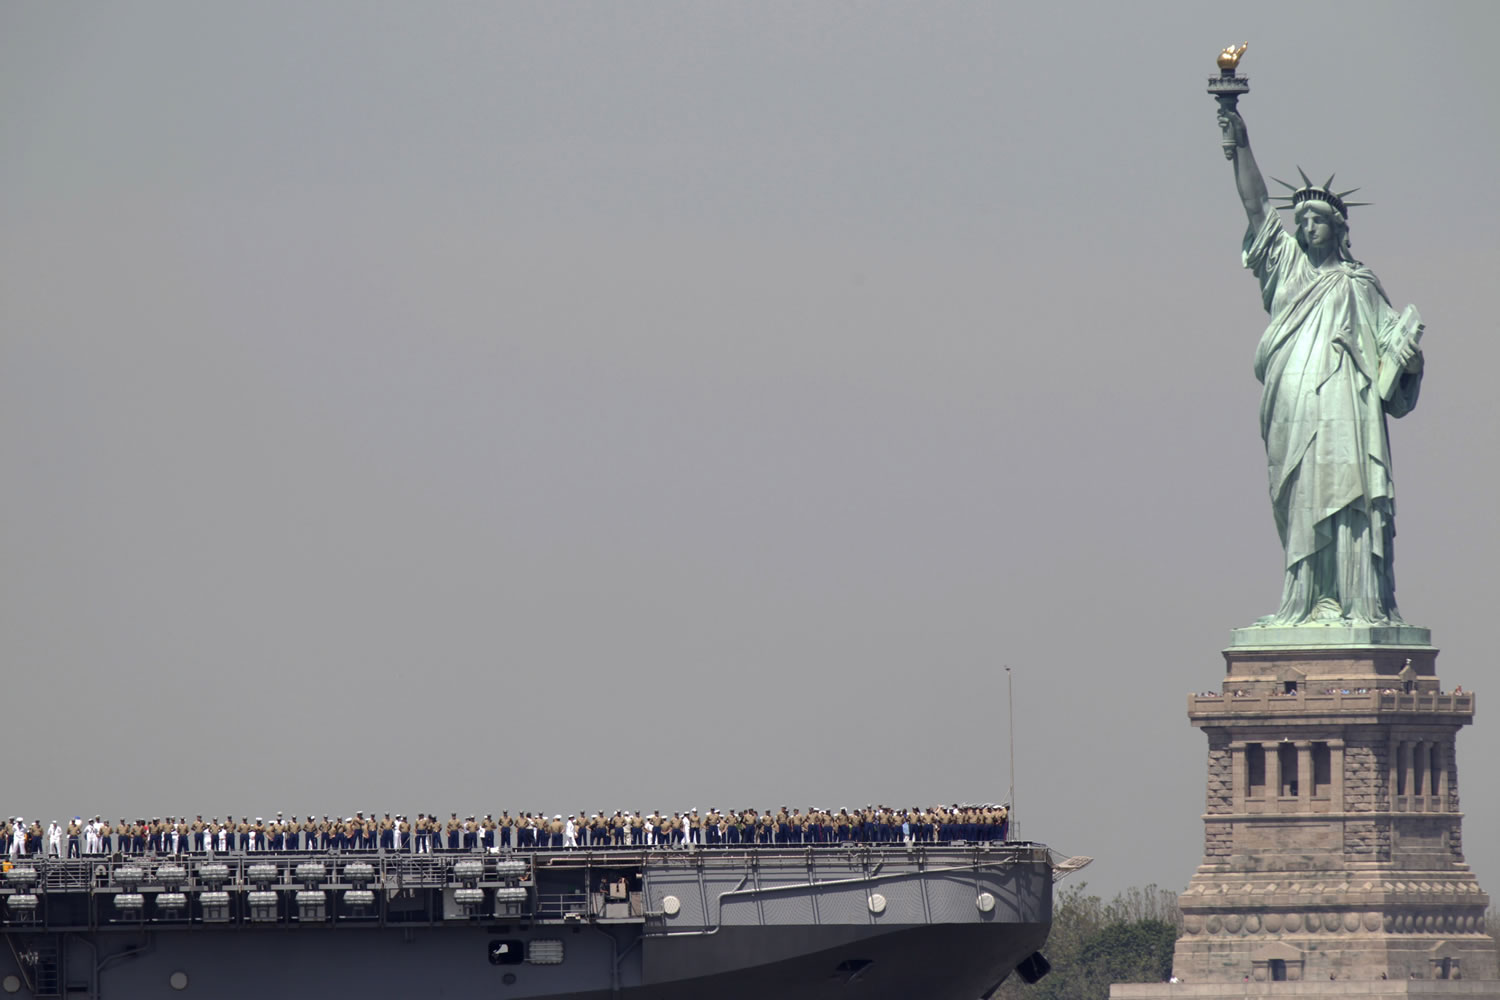 Sailors stand on deck of the USS Iwo Jima as it passes Liberty Island and the Statue of Liberty during 2011 Fleet Week in New York.